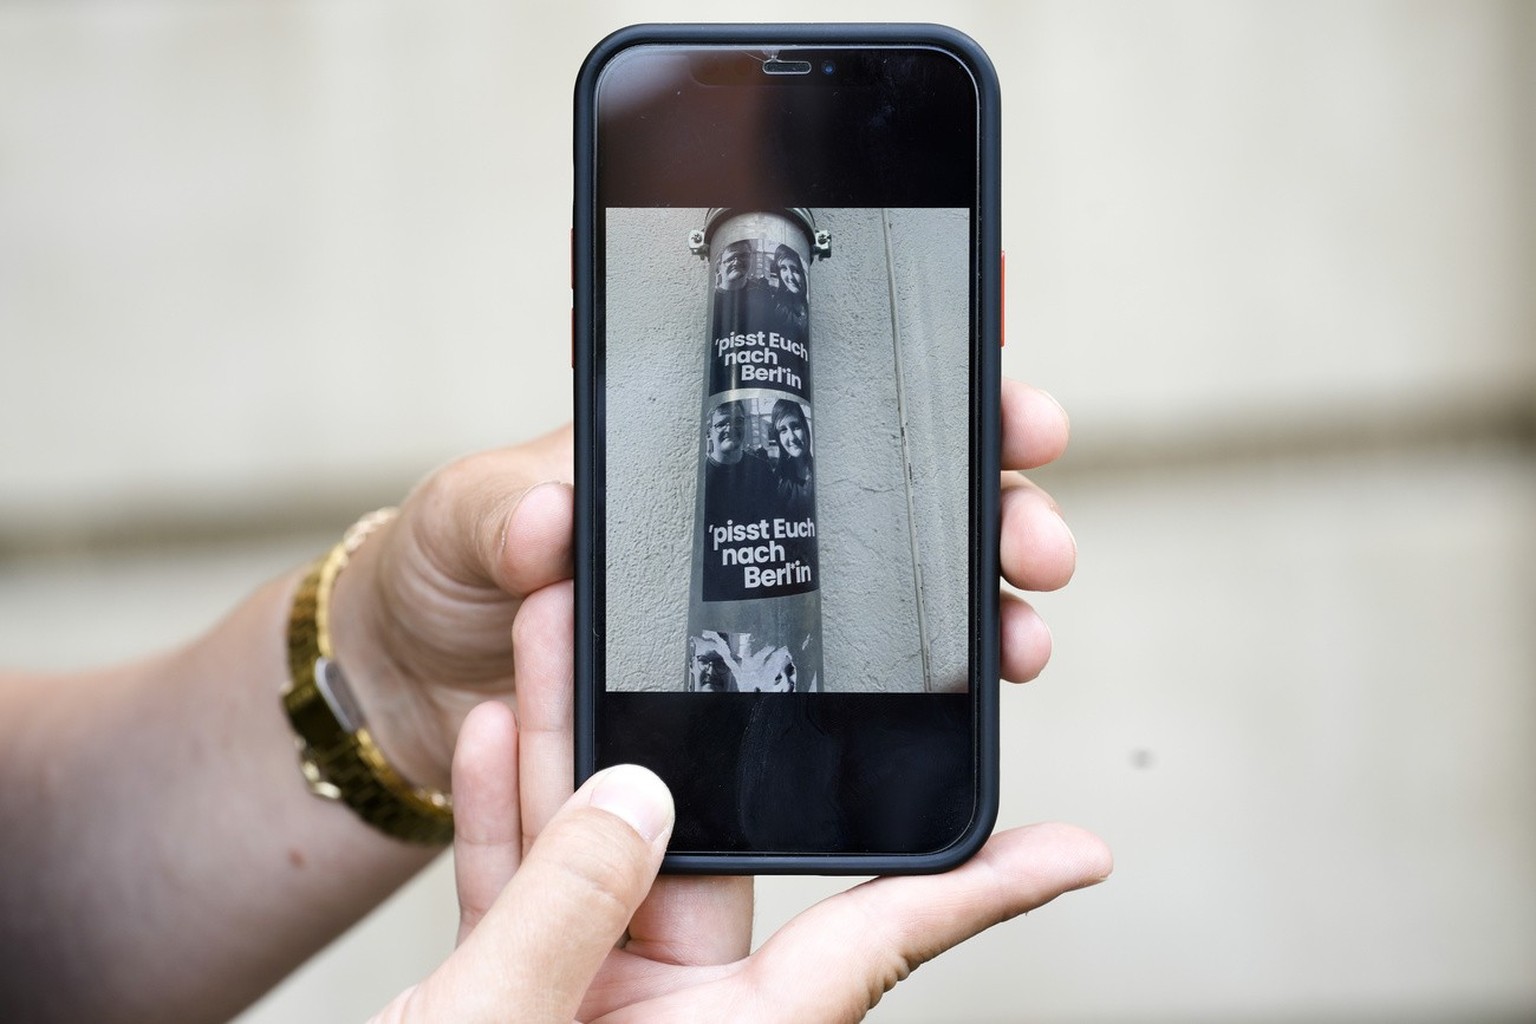 Teacher Laura Nickel shows her cell phone with pictures of stickers on a lamp pole showing images of her and colleague Max Teske with the caption &quot;piss off to Berlin&quot; during an interview wit ...